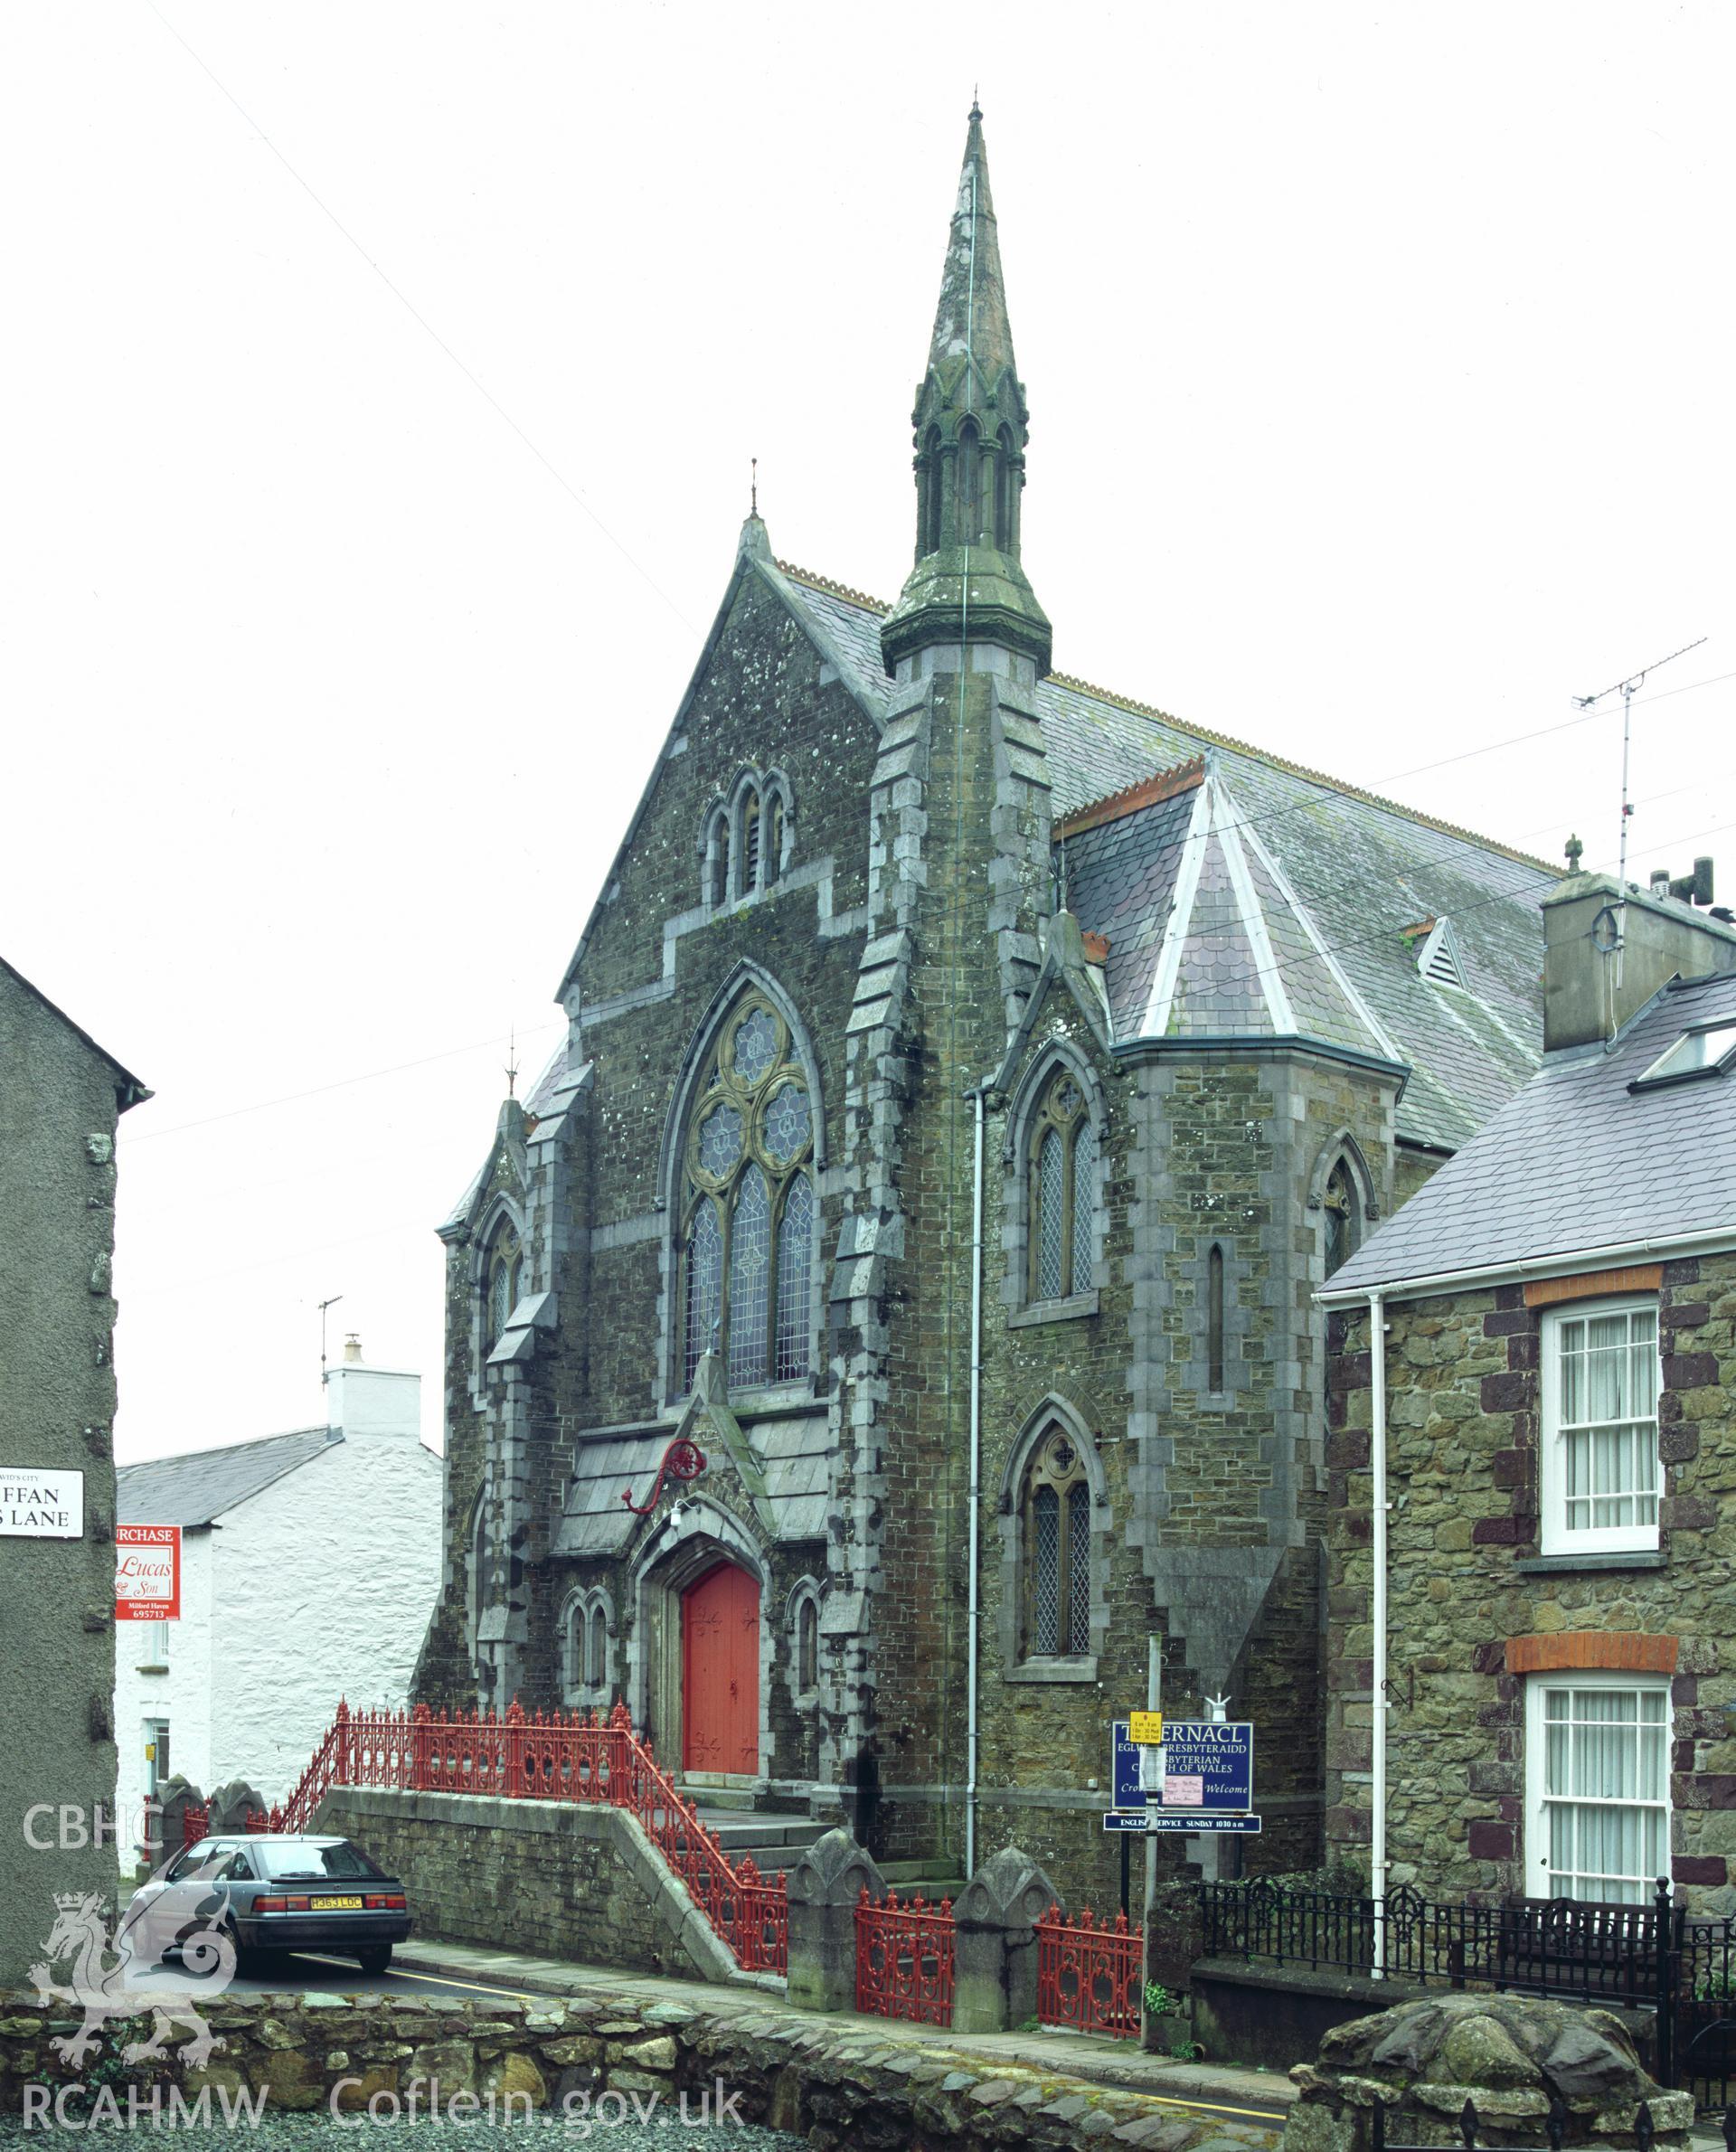 RCAHMW colour transparency showing an exterior view of Capel Tabernacle, St Davids.